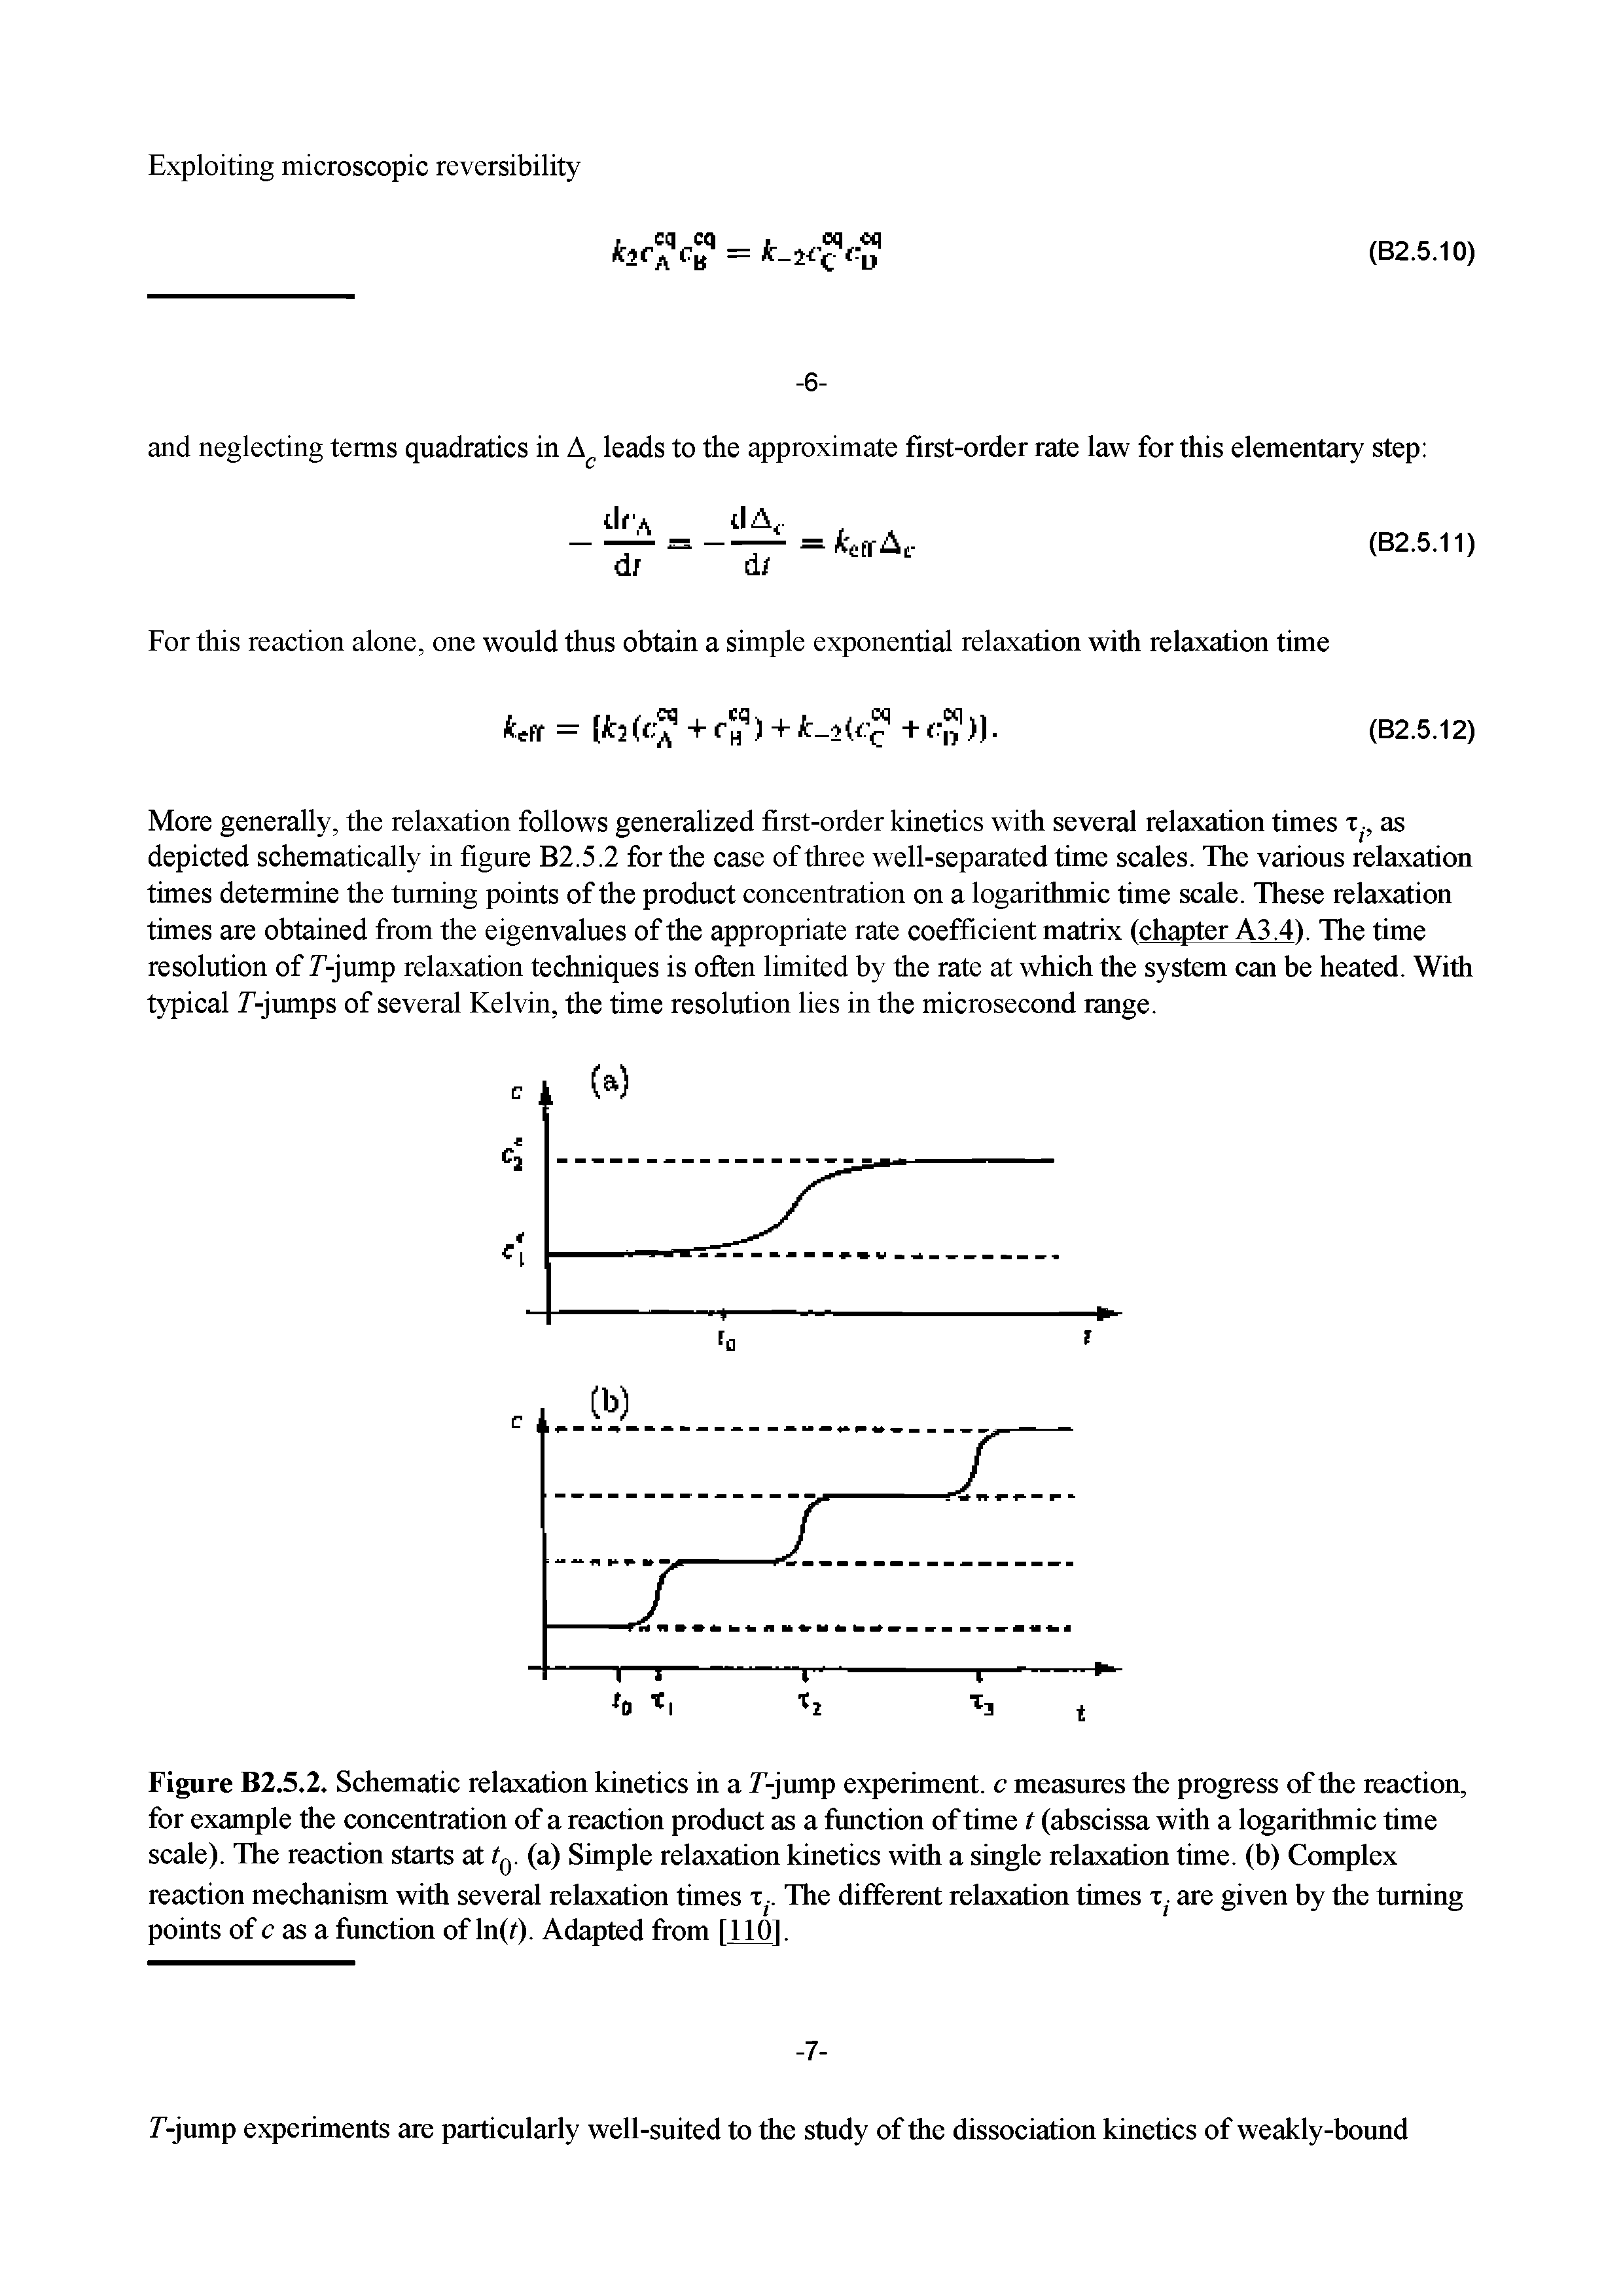 Figure B2.5.2. Schematic relaxation kinetics in a T-jump experiment, c measures the progress of the reaction, for example the concentration of a reaction product as a function of time t (abscissa with a logarithmic time scale). The reaction starts at (q. (a) Simple relaxation kinetics with a single relaxation time, (b) Complex reaction mechanism with several relaxation times x-. The different relaxation times x. are given by the turning points of c as a function of ln(t). Adapted from [110].